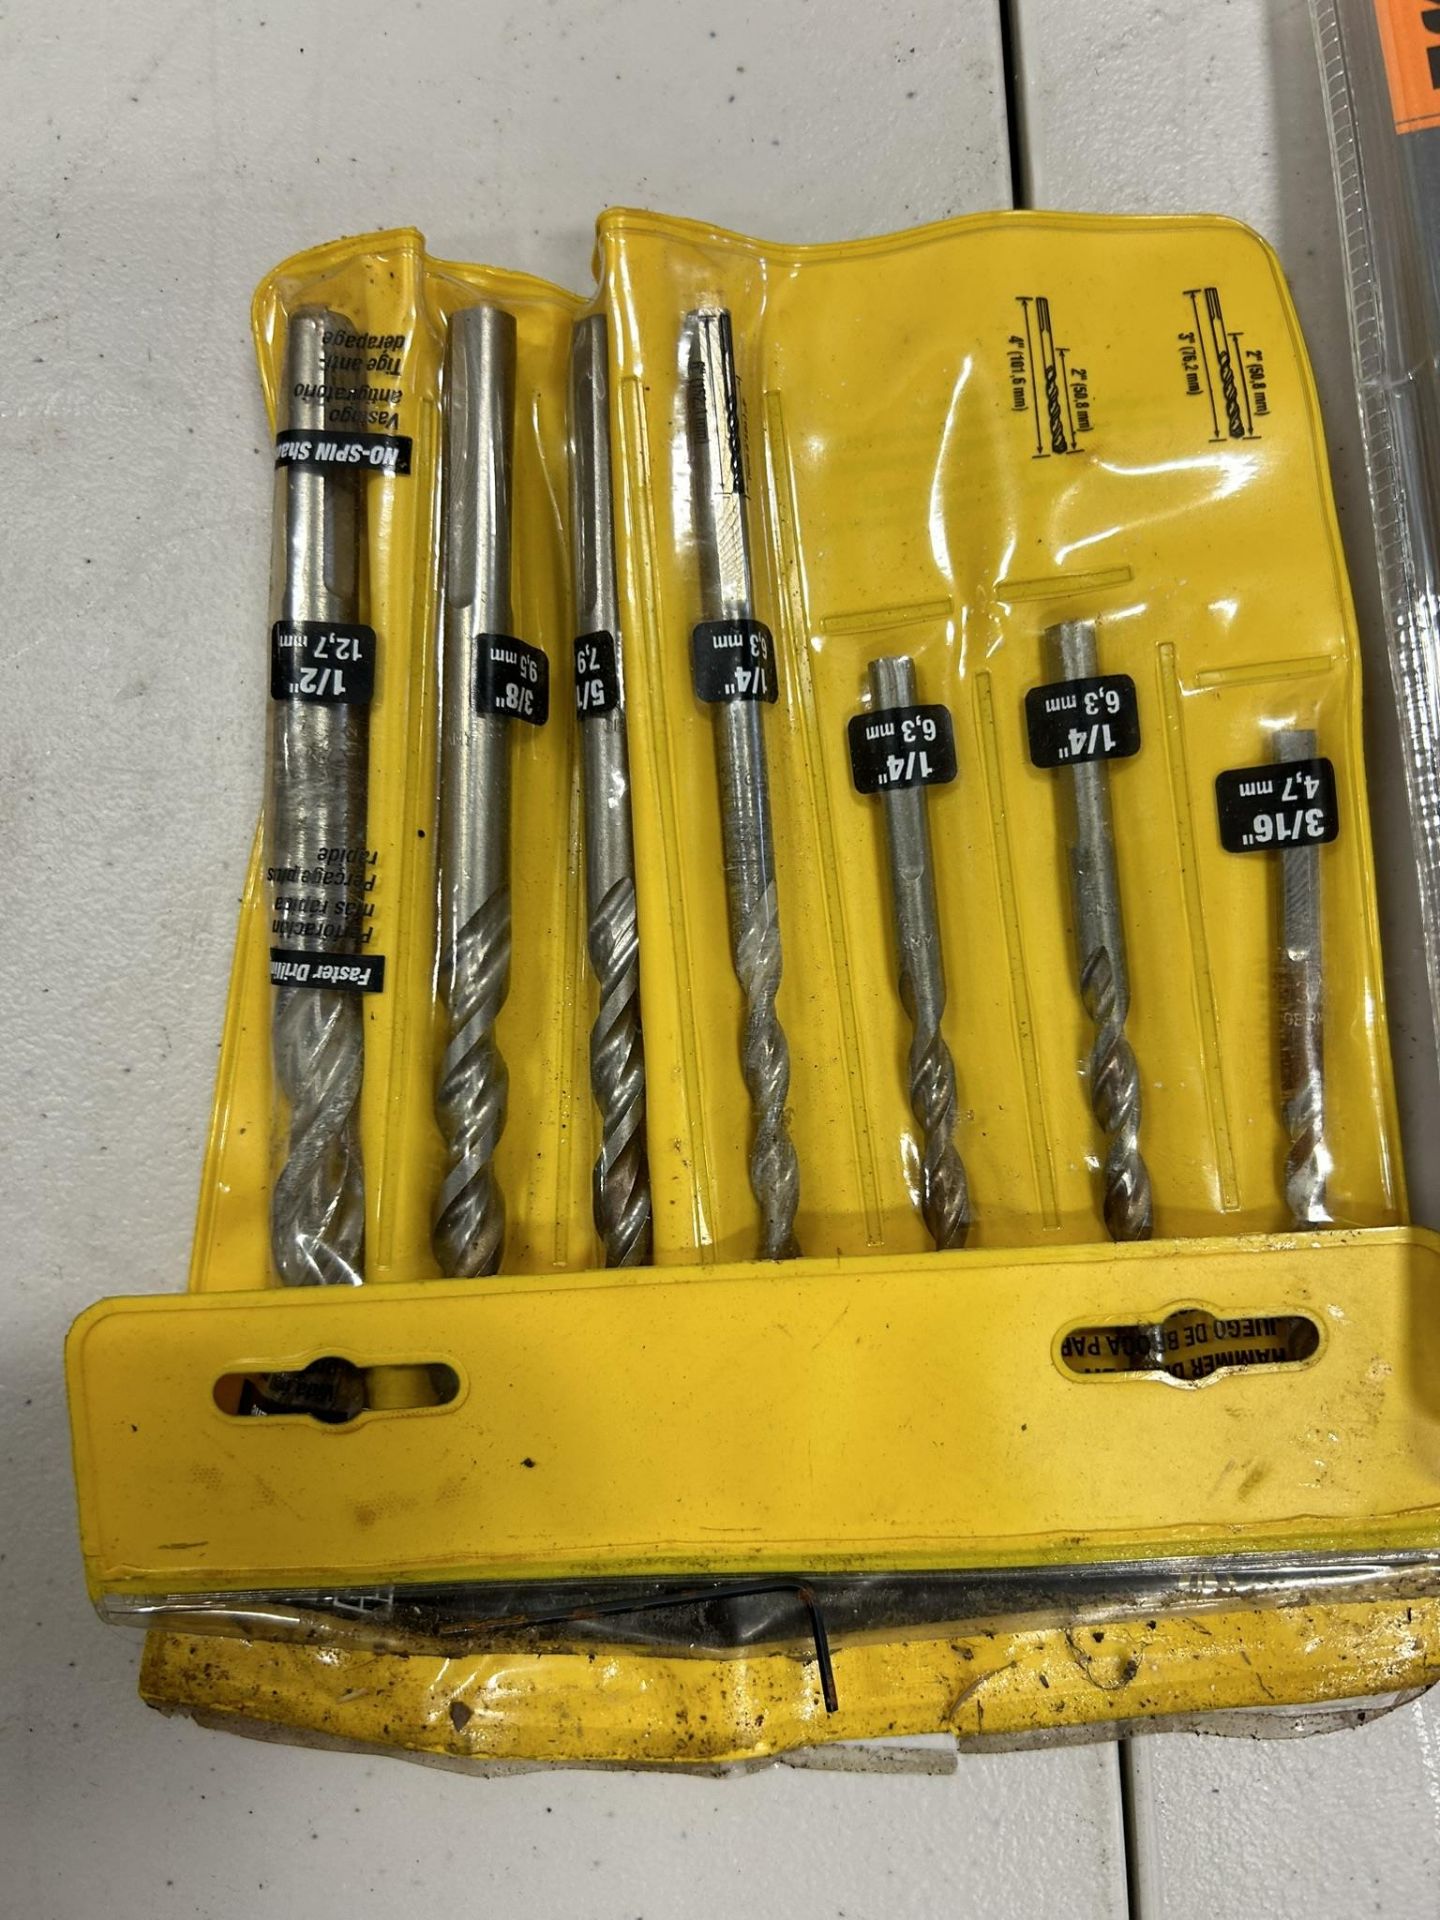 PRECISION DRIVER SET, DRIVER BITS, WIRE STRIPPERS, DRILL BITS, HEX KEYS, ETC. - Image 10 of 11